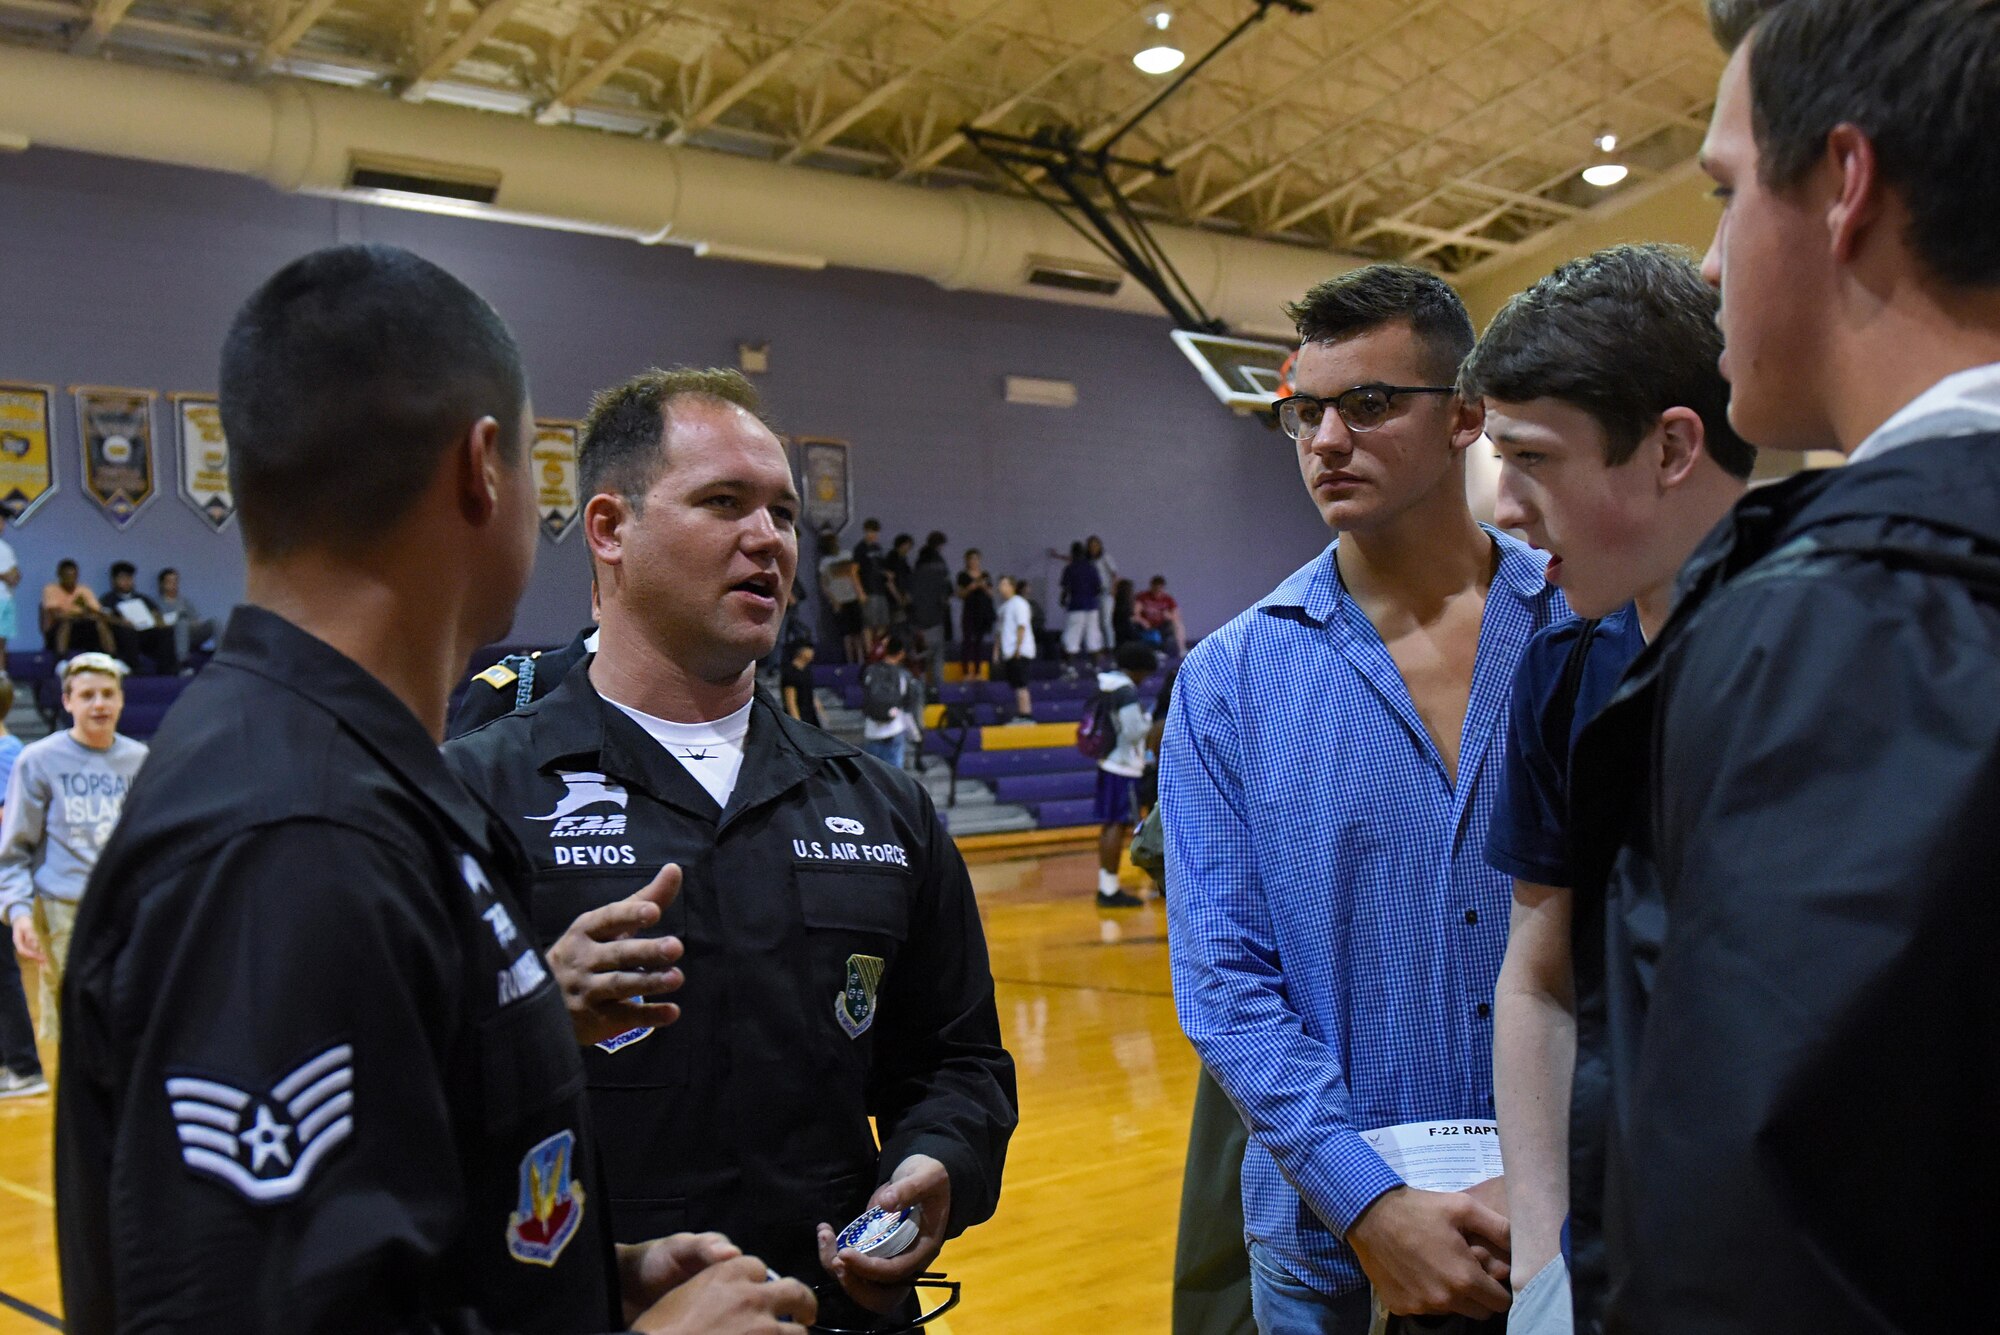 Staff Sgt. Robert Rodriguez (left) and Senior Airman Jack Devos (center left) of the U.S. Air Force F-22 Raptor Demo Team speak with Rosewood High School students, May 18, 2017, at Rosewood High School in Goldsboro, North Carolina. The team visited the school to share stories about their Air Force experience and teach the students about the F-22 Raptor. (U.S. Air Force photo by Senior Airman Ashley Maldonado)